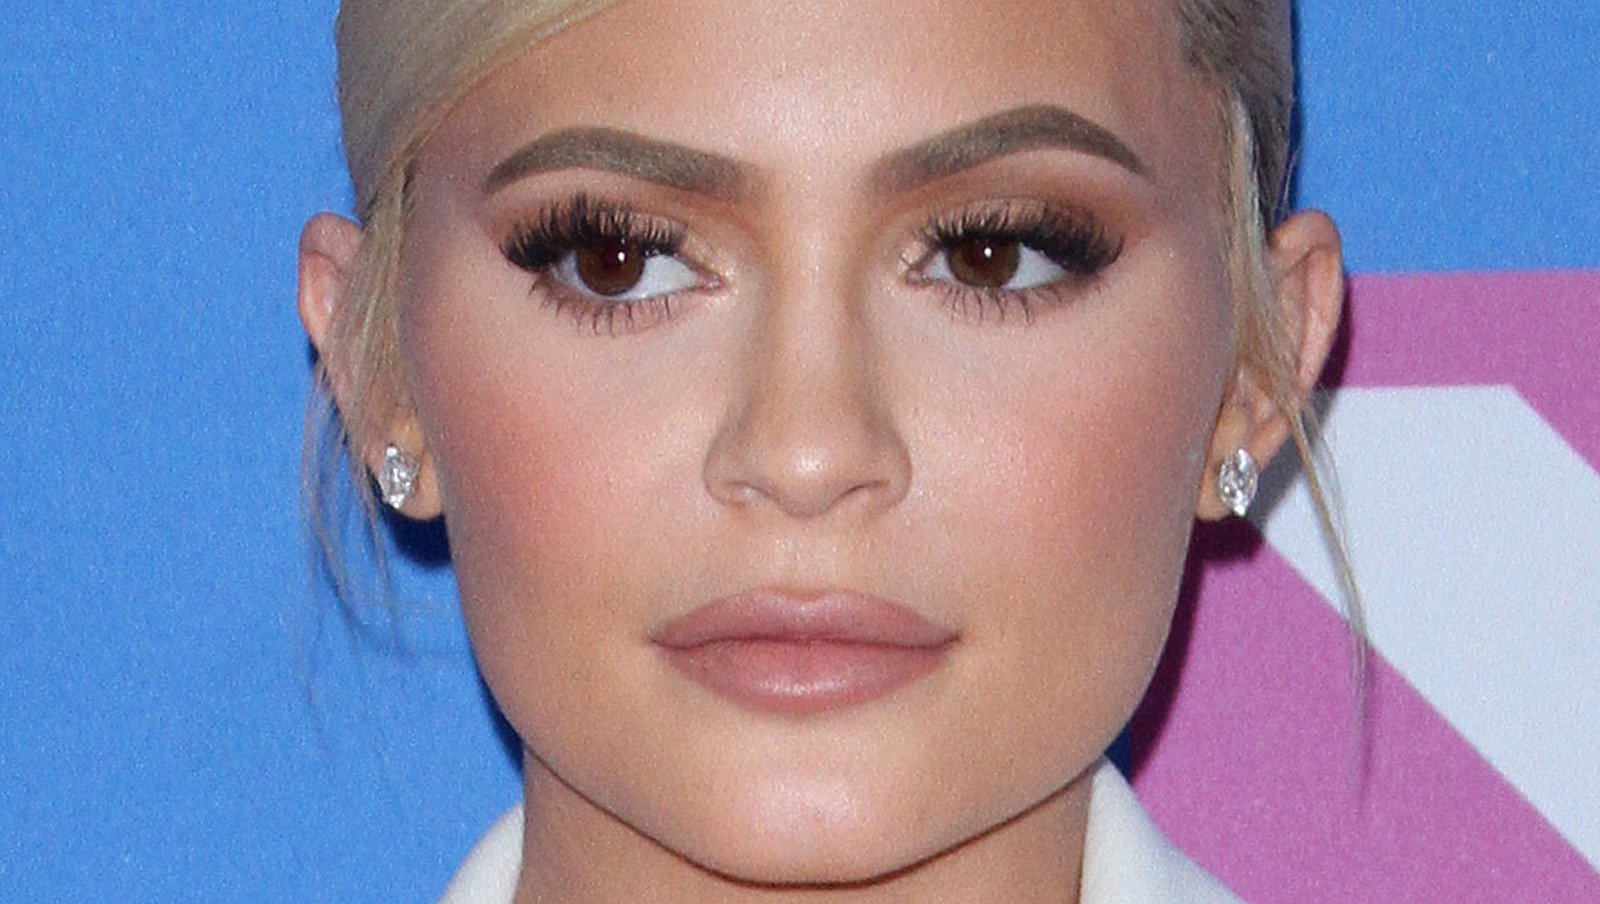 Kylie Jenner's New Makeup Collection Has Some Fans Calling Her Out - Nicki Swift